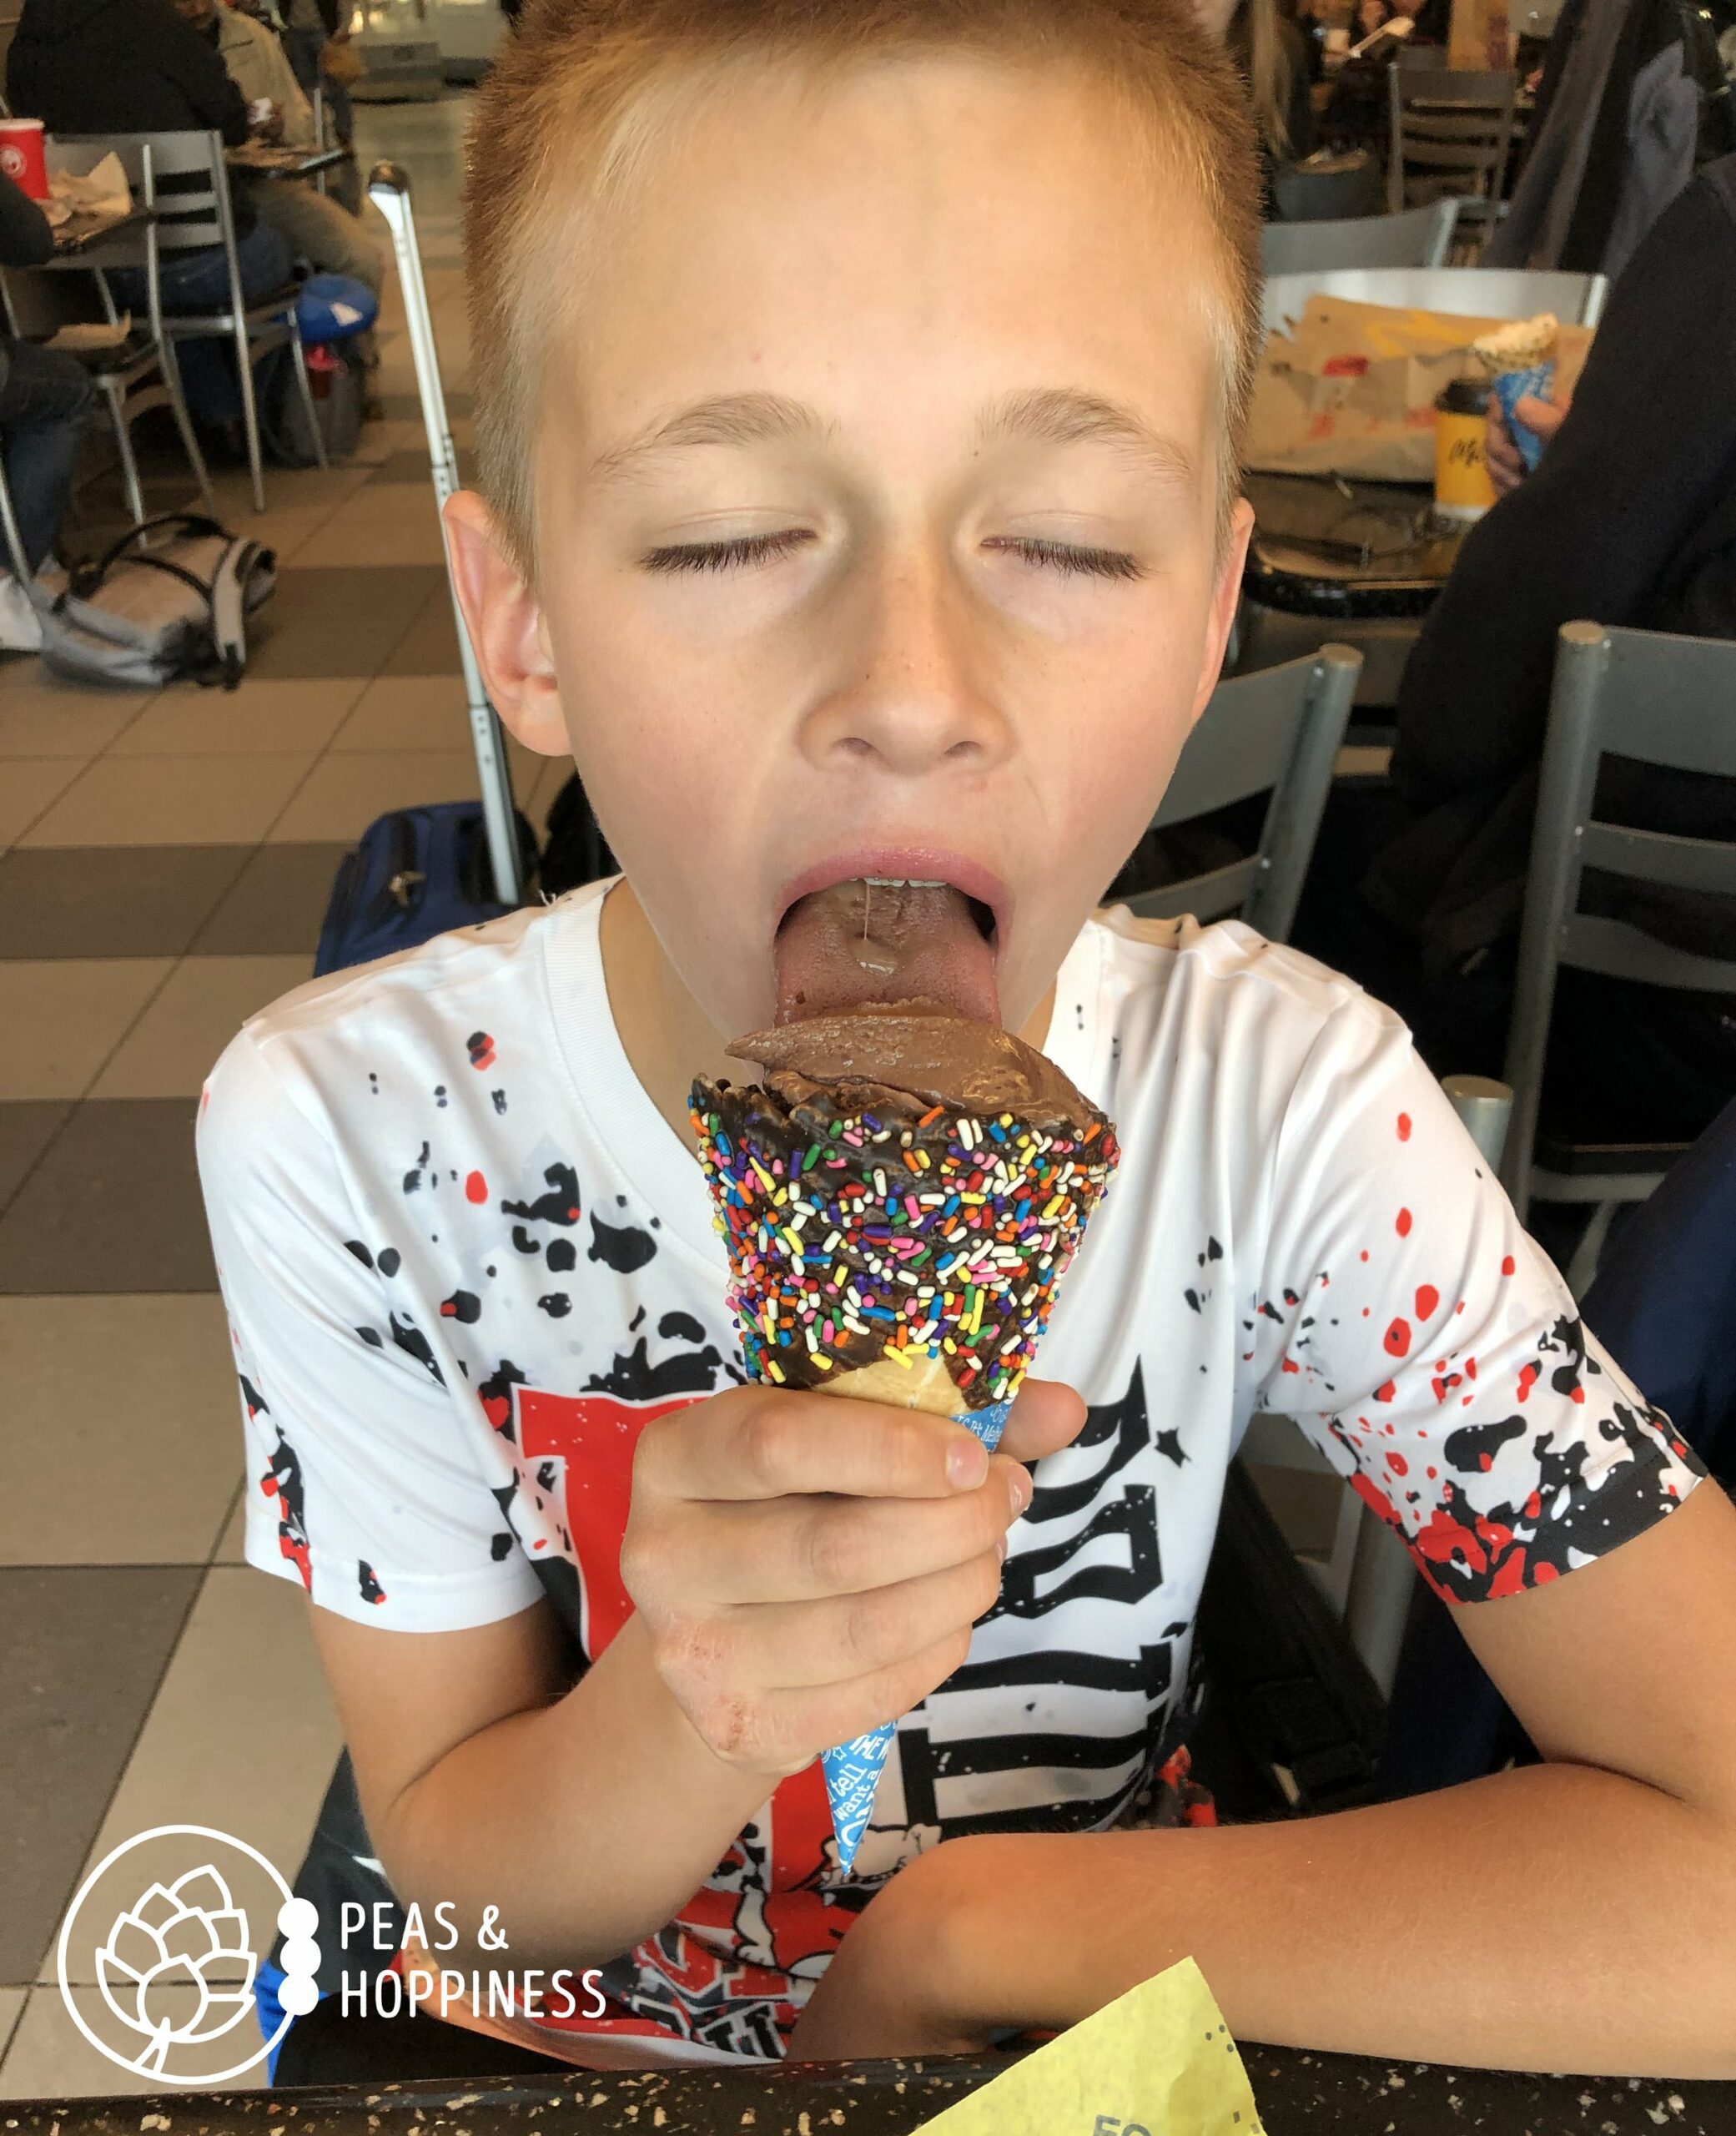 Jonah enjoys a chocolate ice cream cone - keep foods morally equivalent to fix picky eating